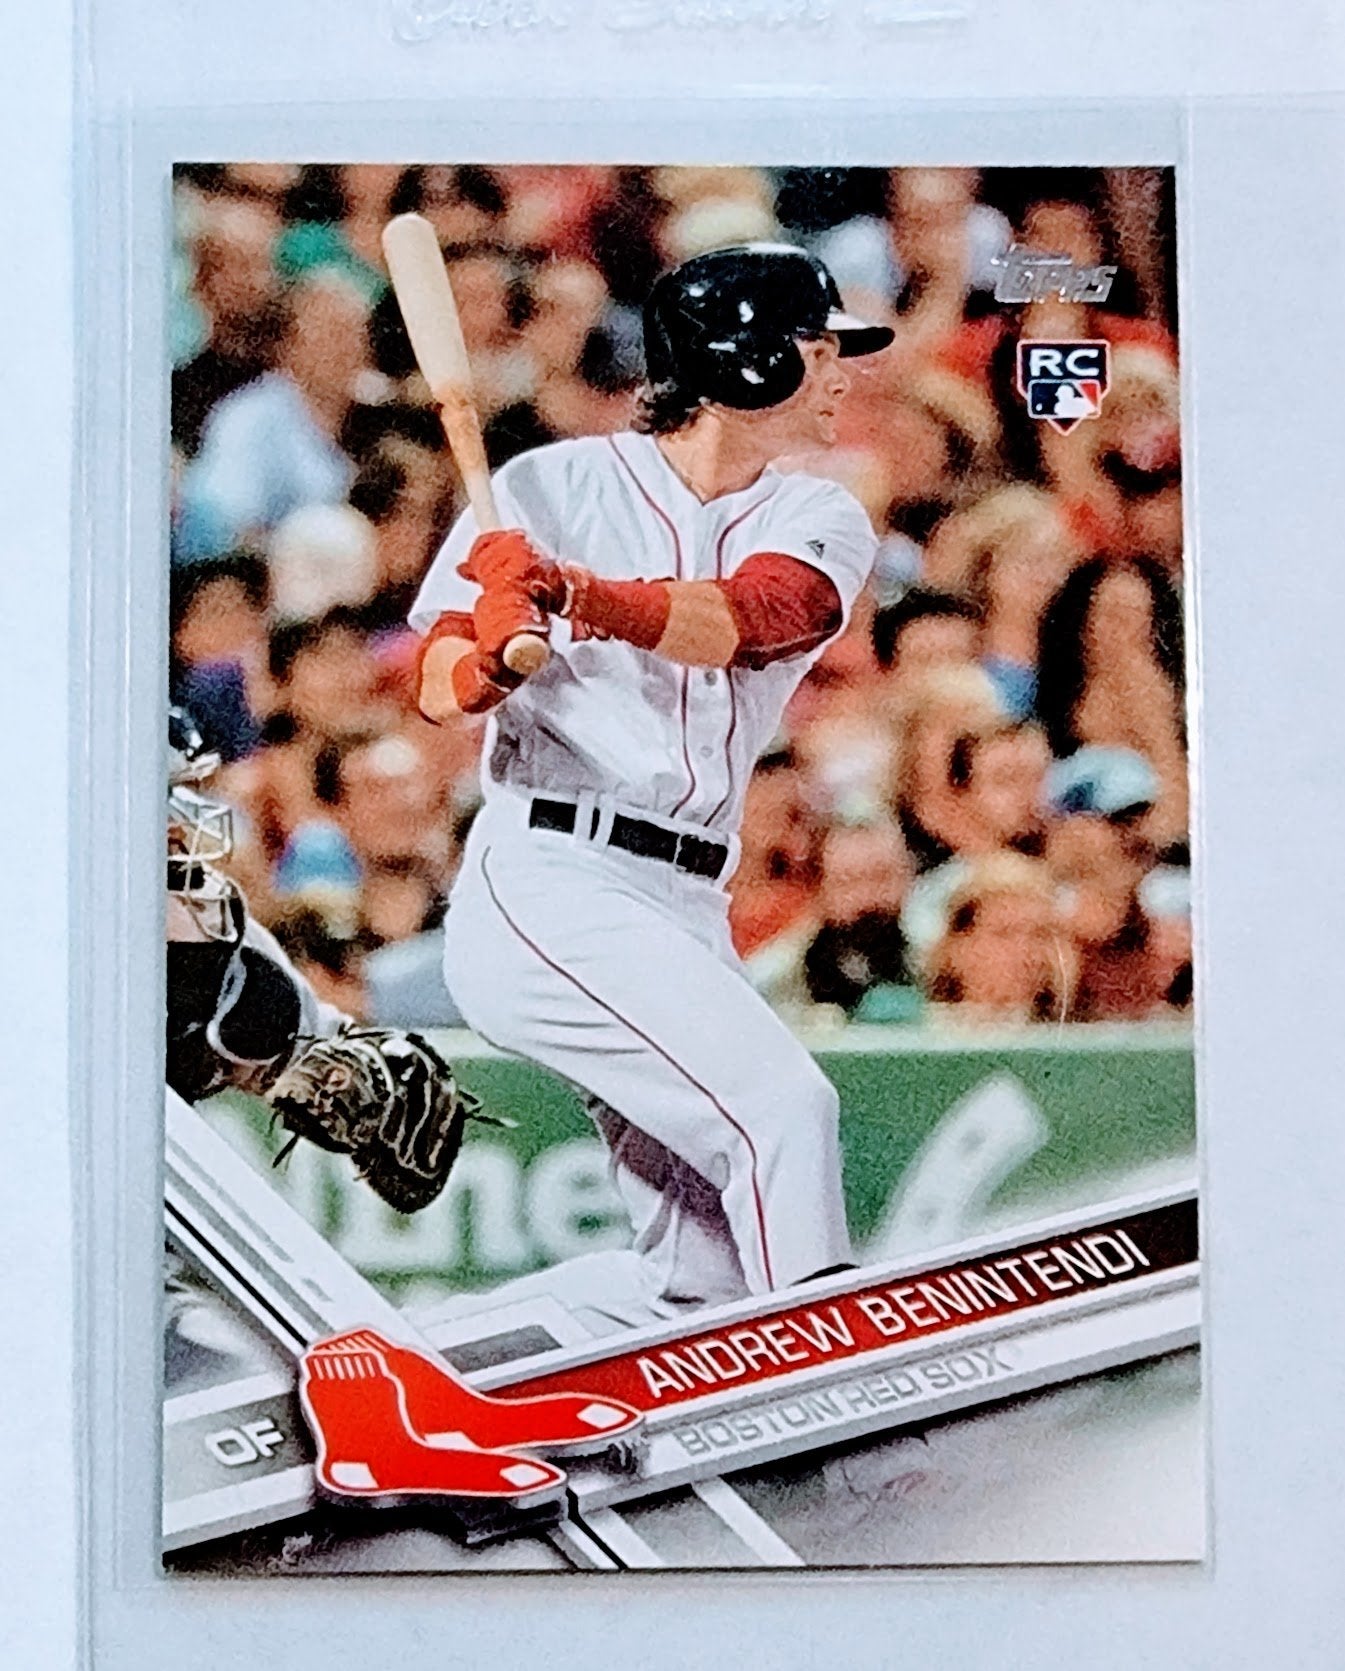 2017 Topps Andrew Benitendi Rookie Baseball Card TPTV simple Xclusive Collectibles   